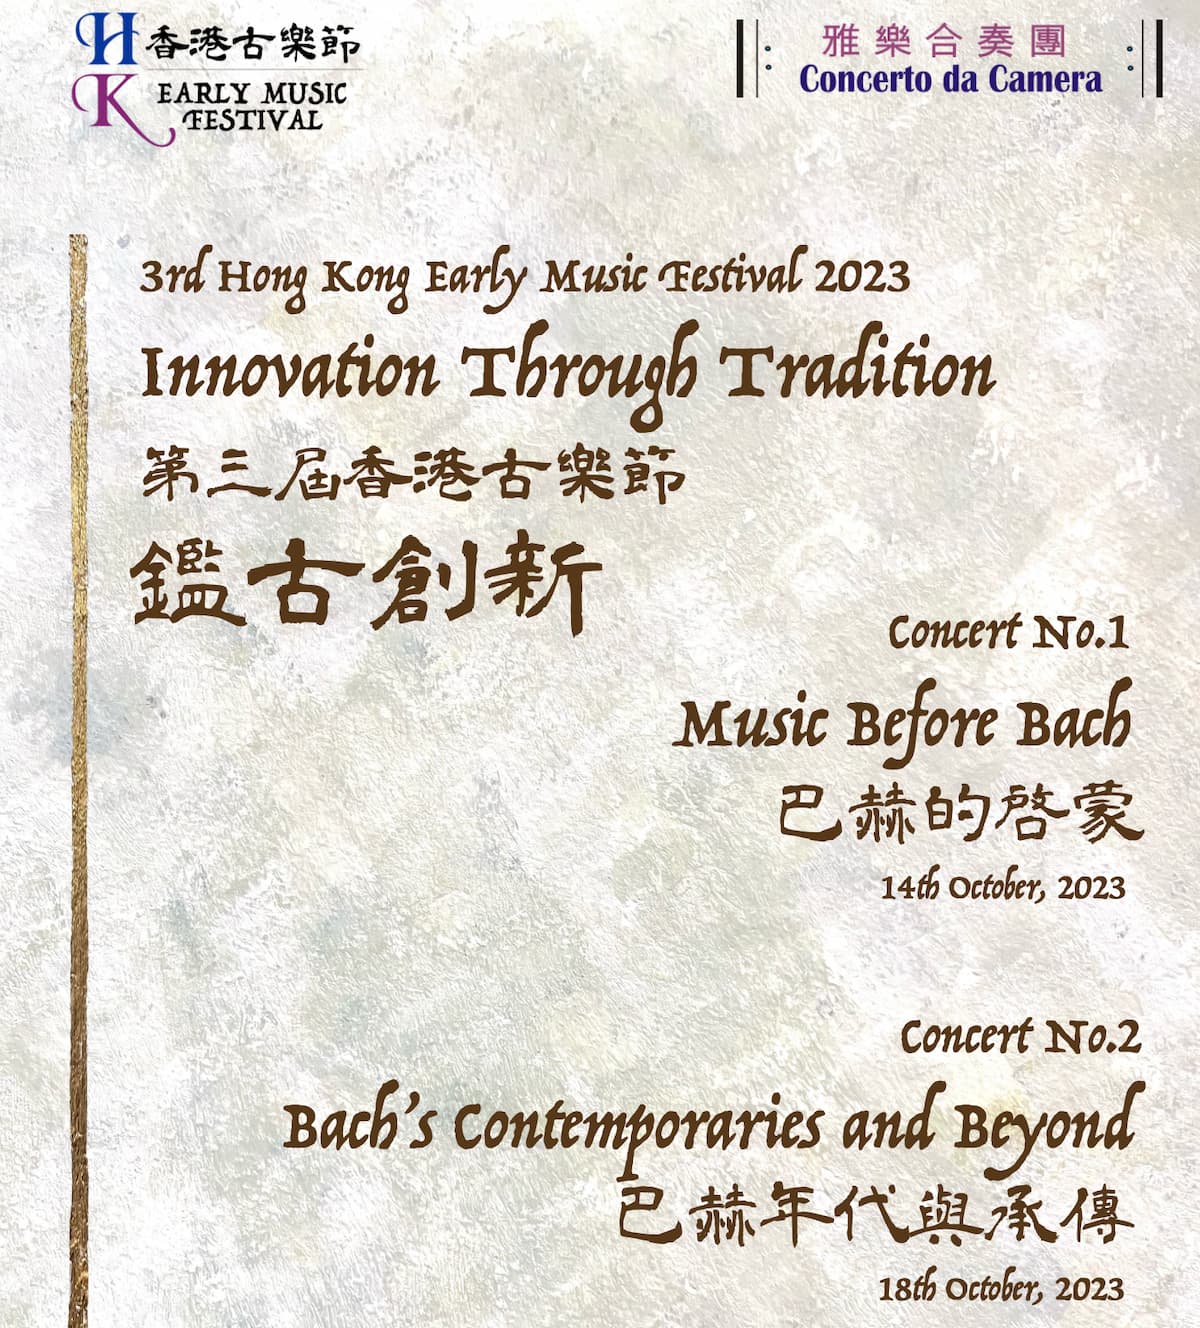 Concert programme of the 3rd Hong Kong Early Music Festival 2023